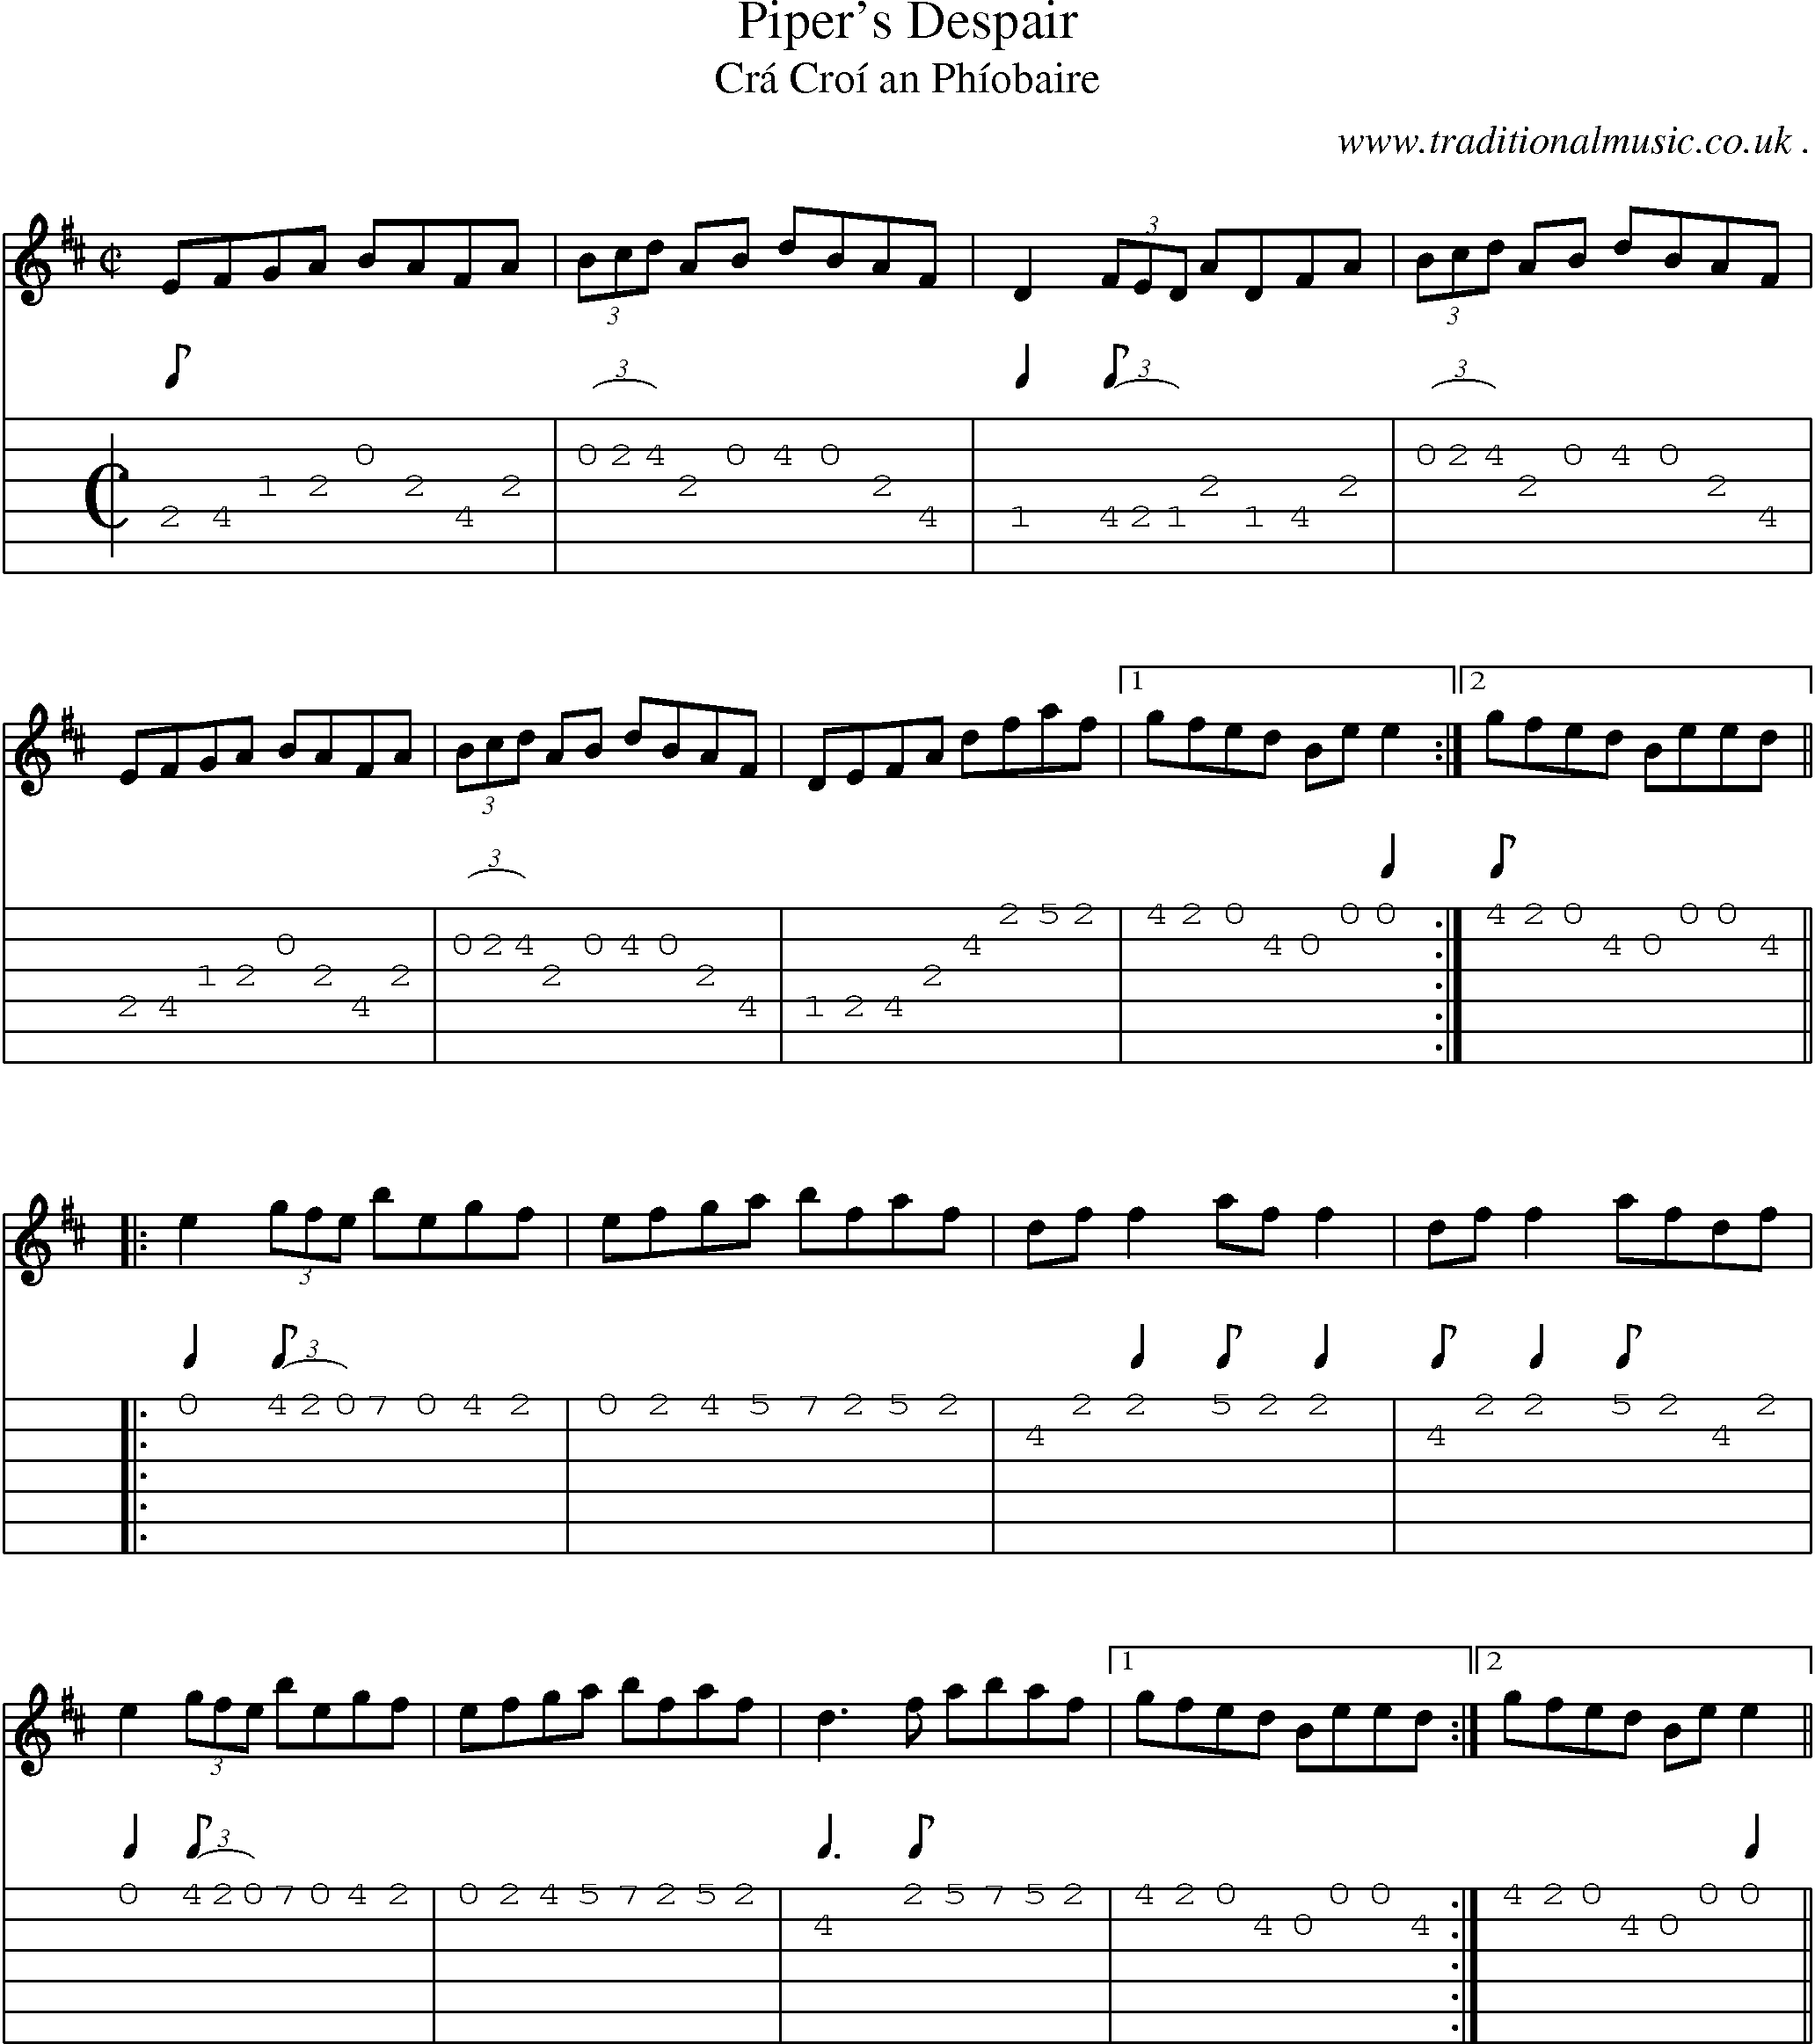 Sheet-Music and Guitar Tabs for Pipers Despair